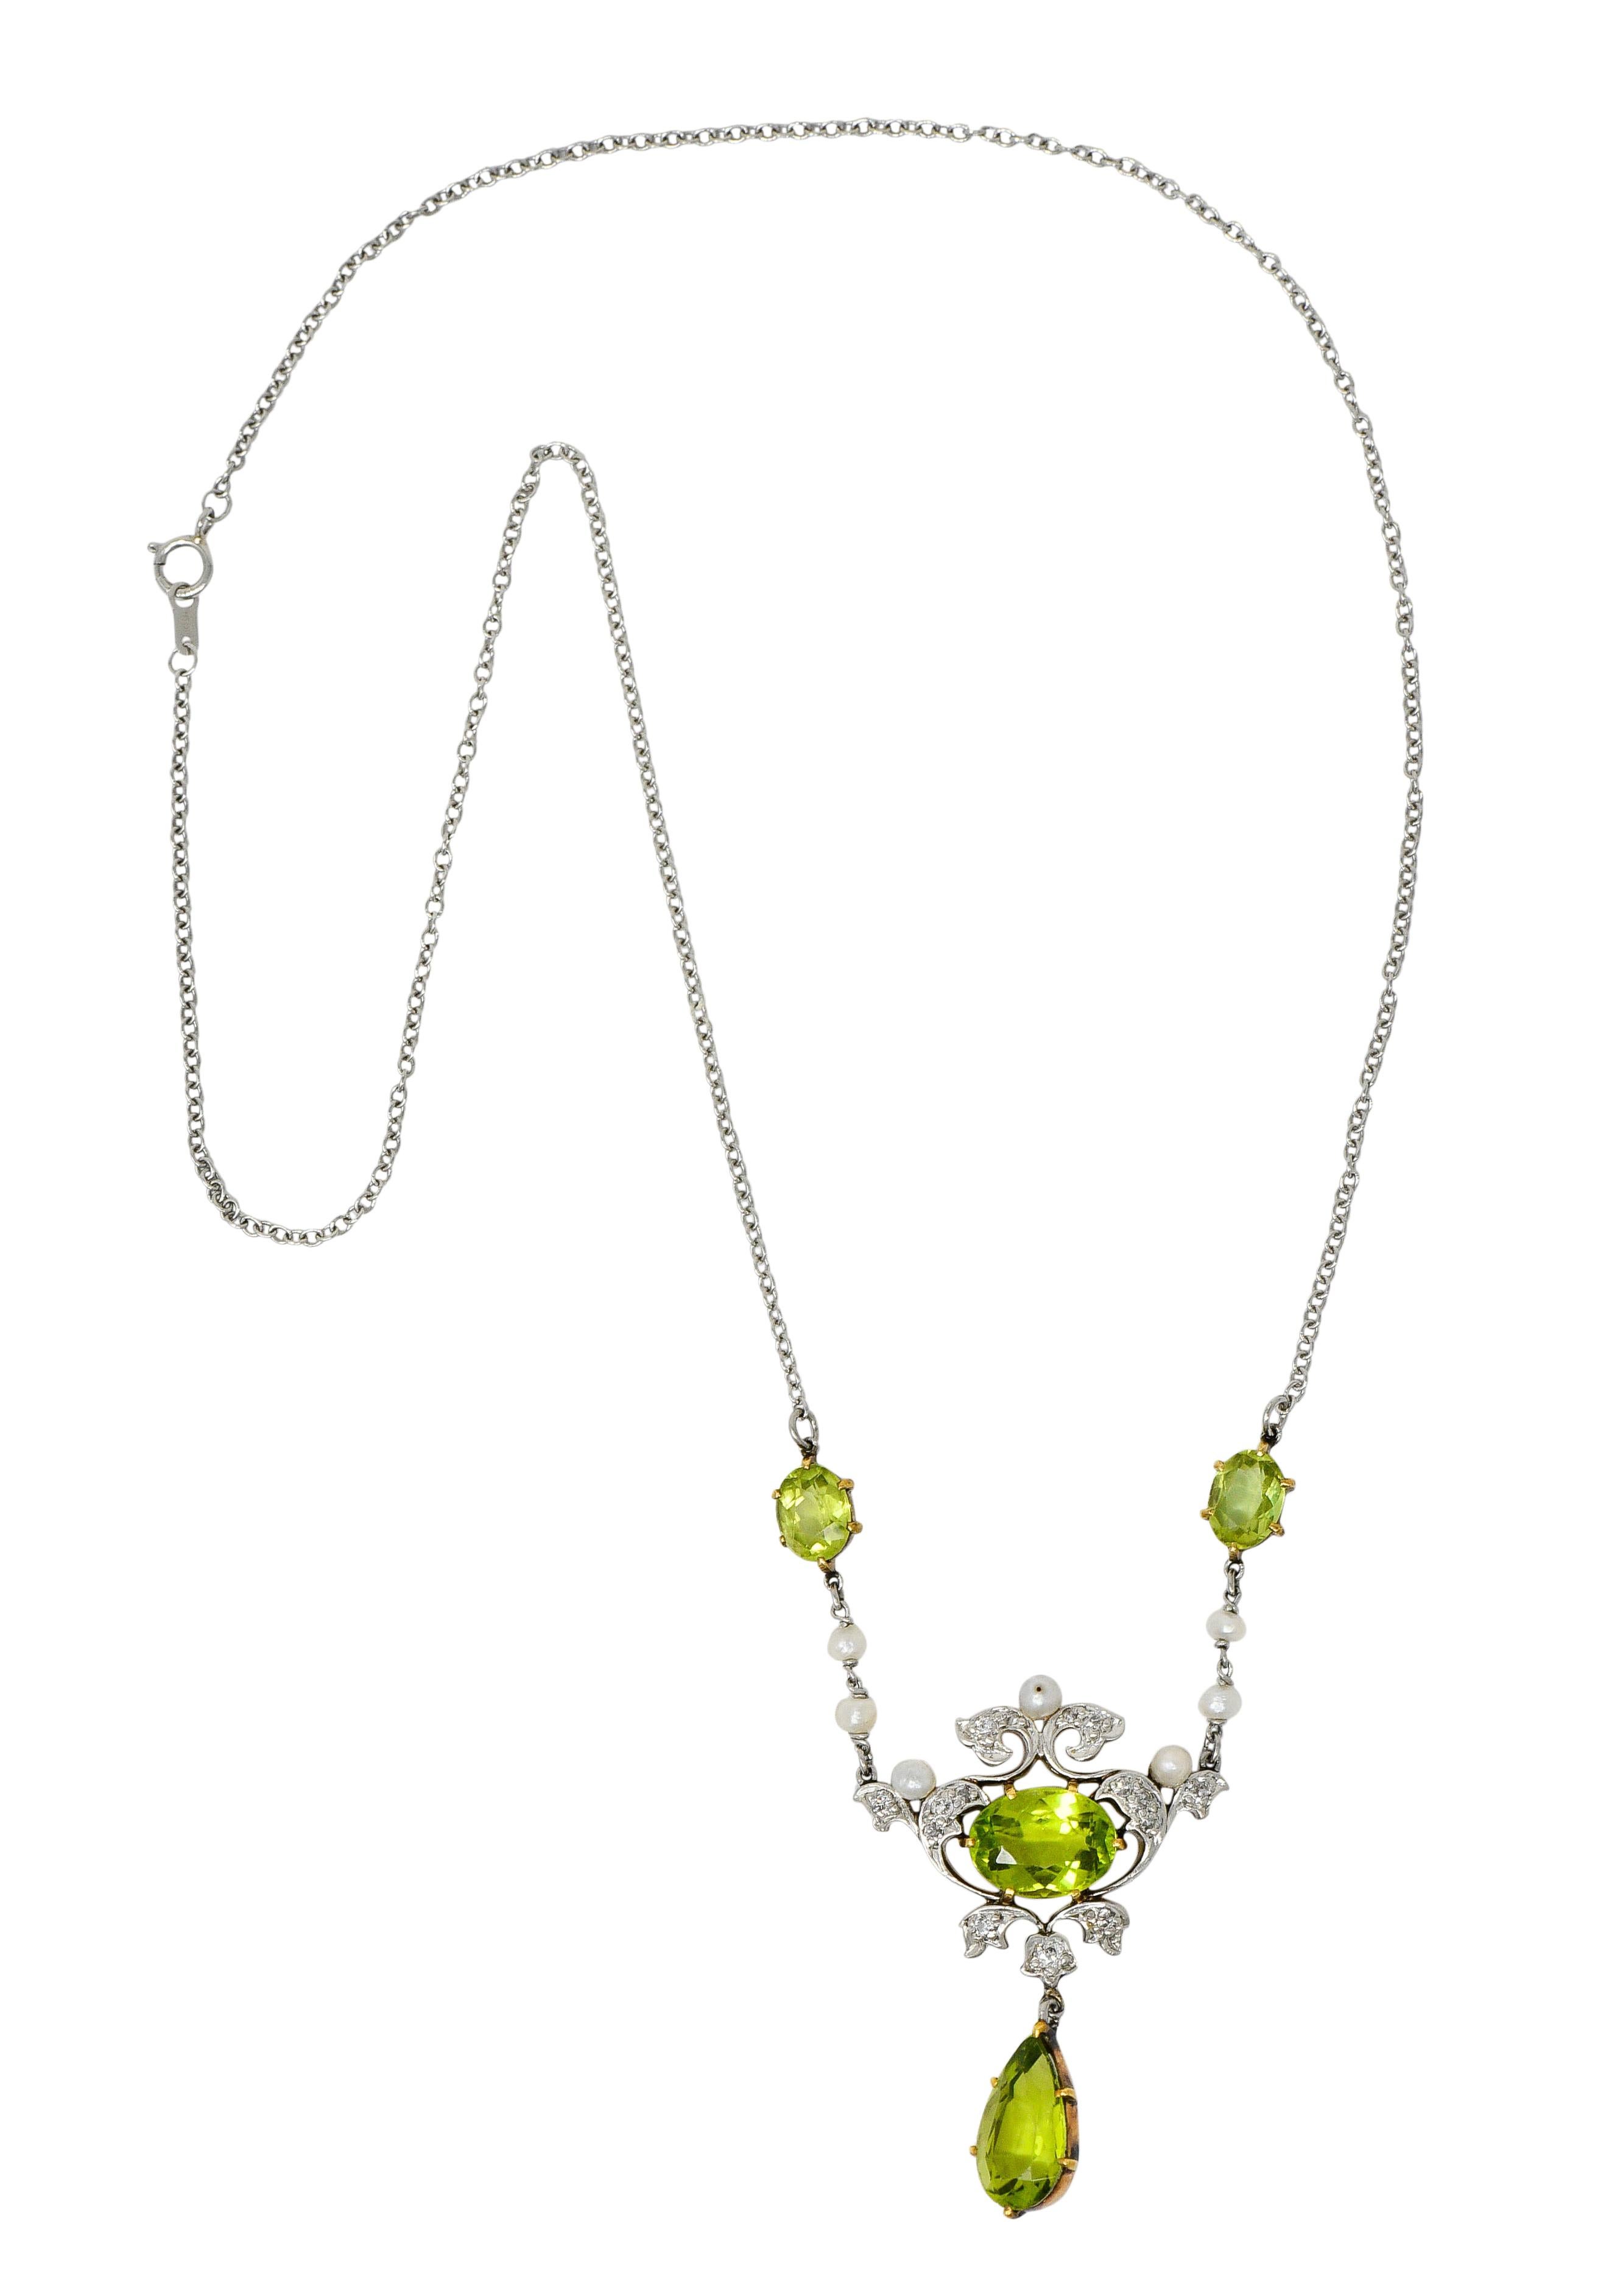 Cable chain necklace with a scrolled foliate center station accented by 3.0 mm freshwater natural pearls

Bead set throughout with old European cut diamonds weighing approximately 0.30 carat; eye-clean and white

Featuring bright yellowish-green